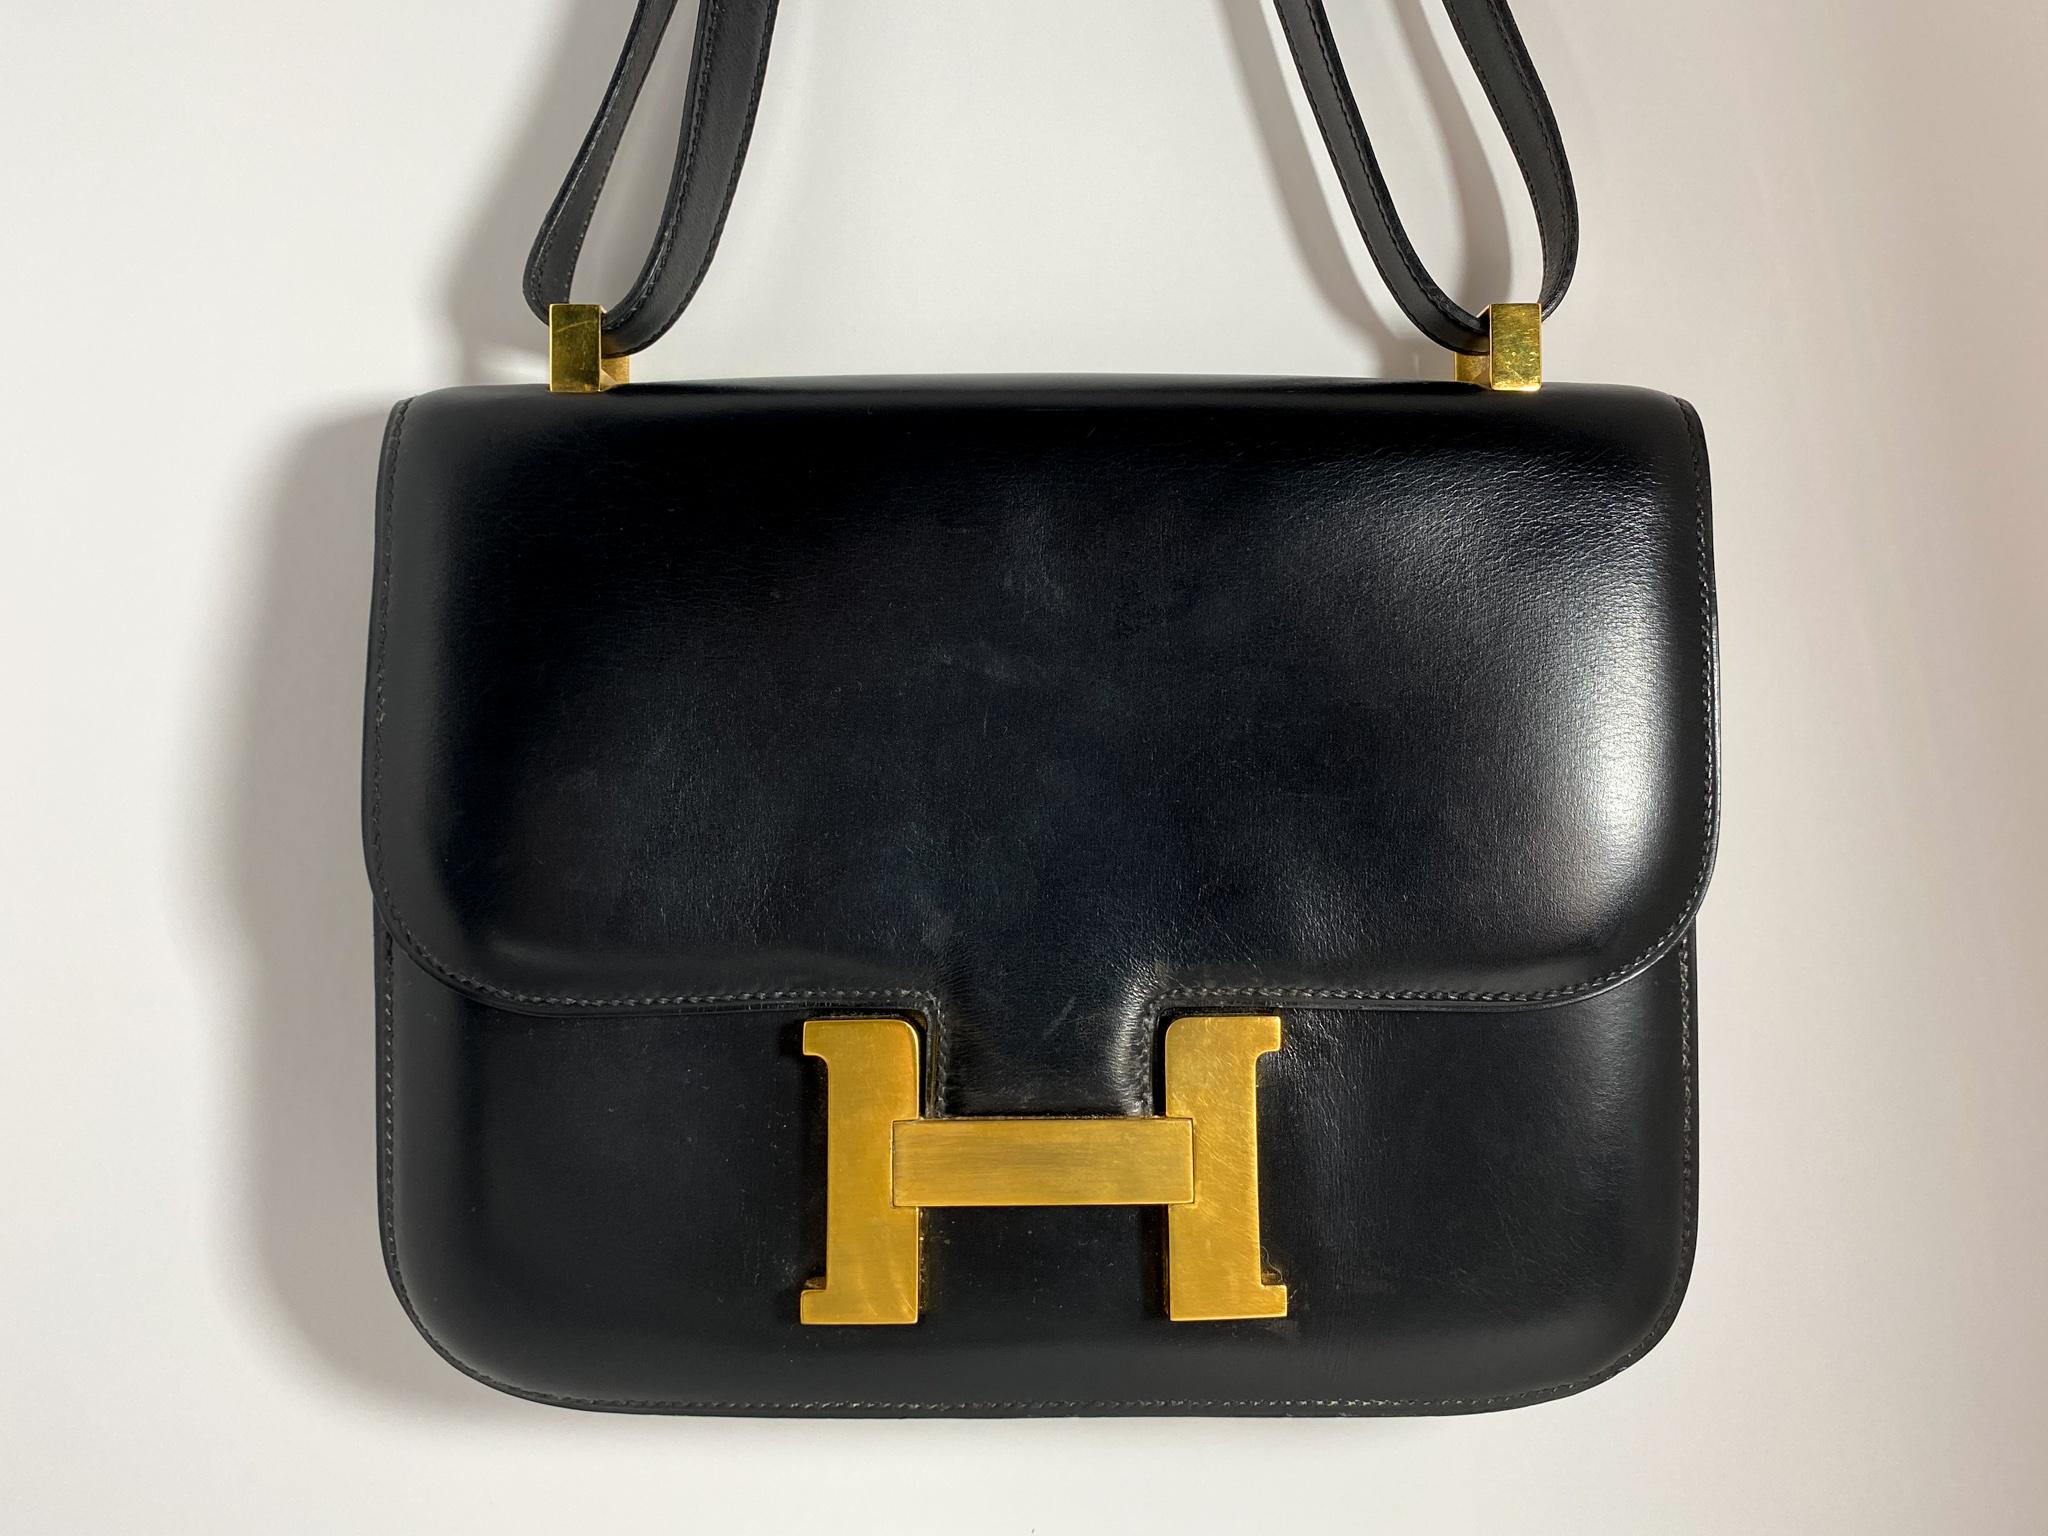 A beautifully structured bag that has aged gracefully, made with black box calf leather, and brushed gold plated hardware. Produced in 1985.

Condition: Good used condition.
Exterior: One exterior pocket, light scuffs and scratches on hardware and